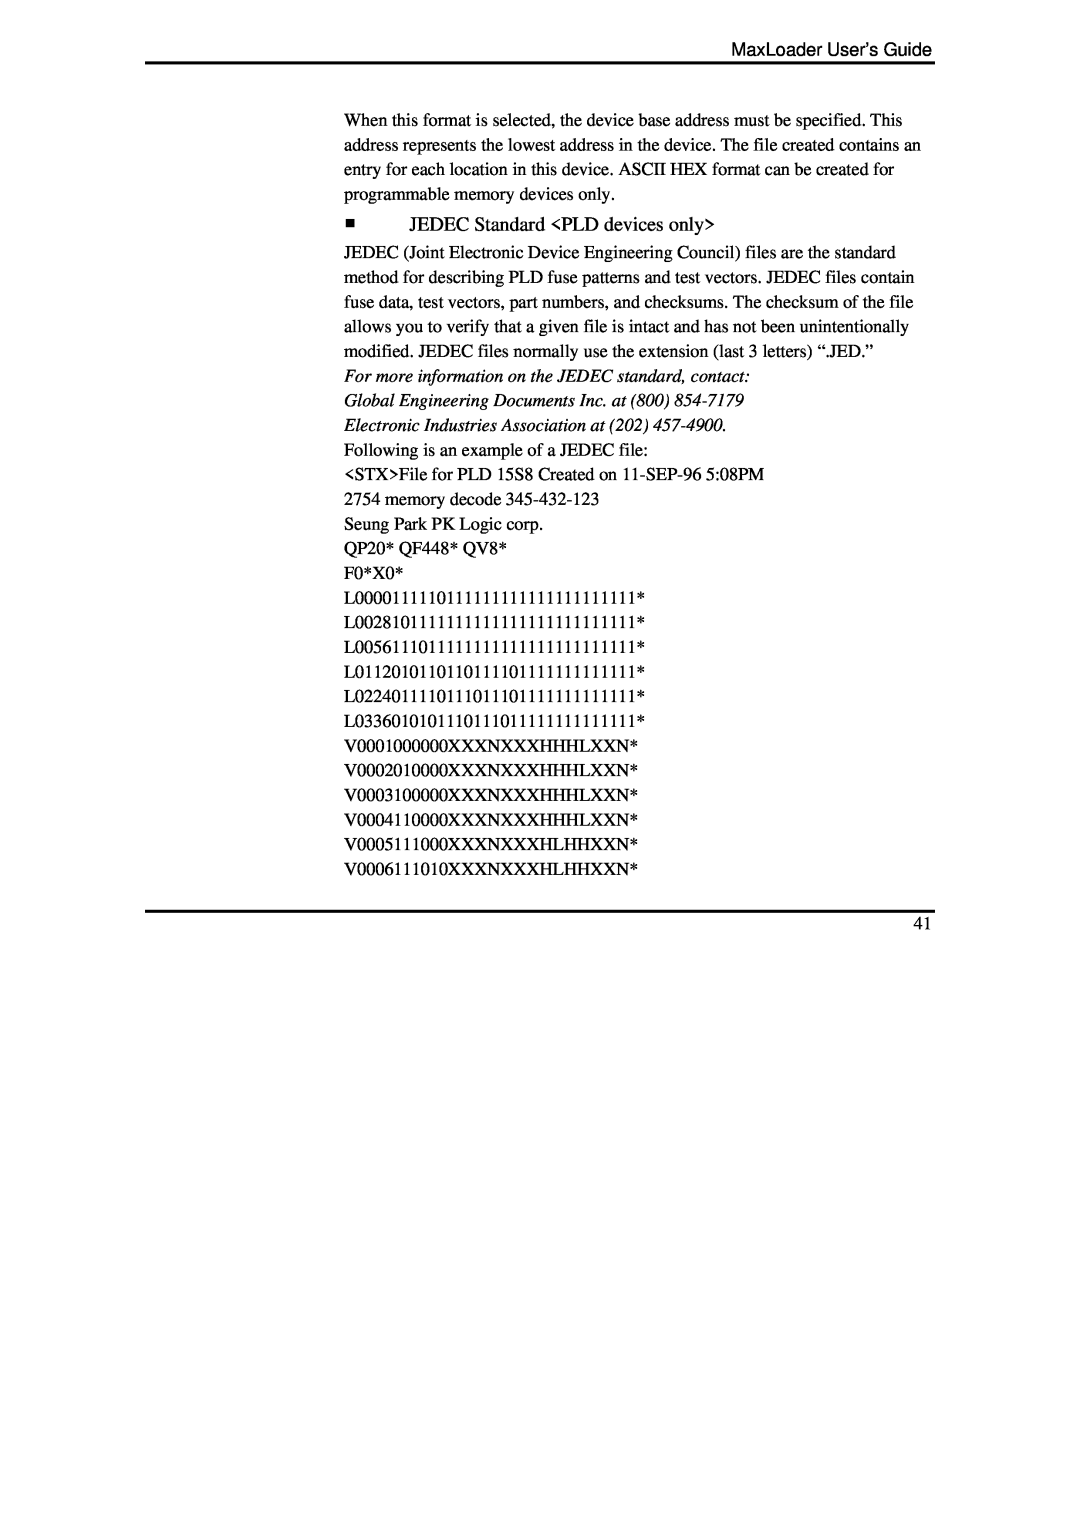 IBM MaxLoader manual ƒ JEDEC Standard PLD devices only, Global Engineering Documents Inc. at 800 